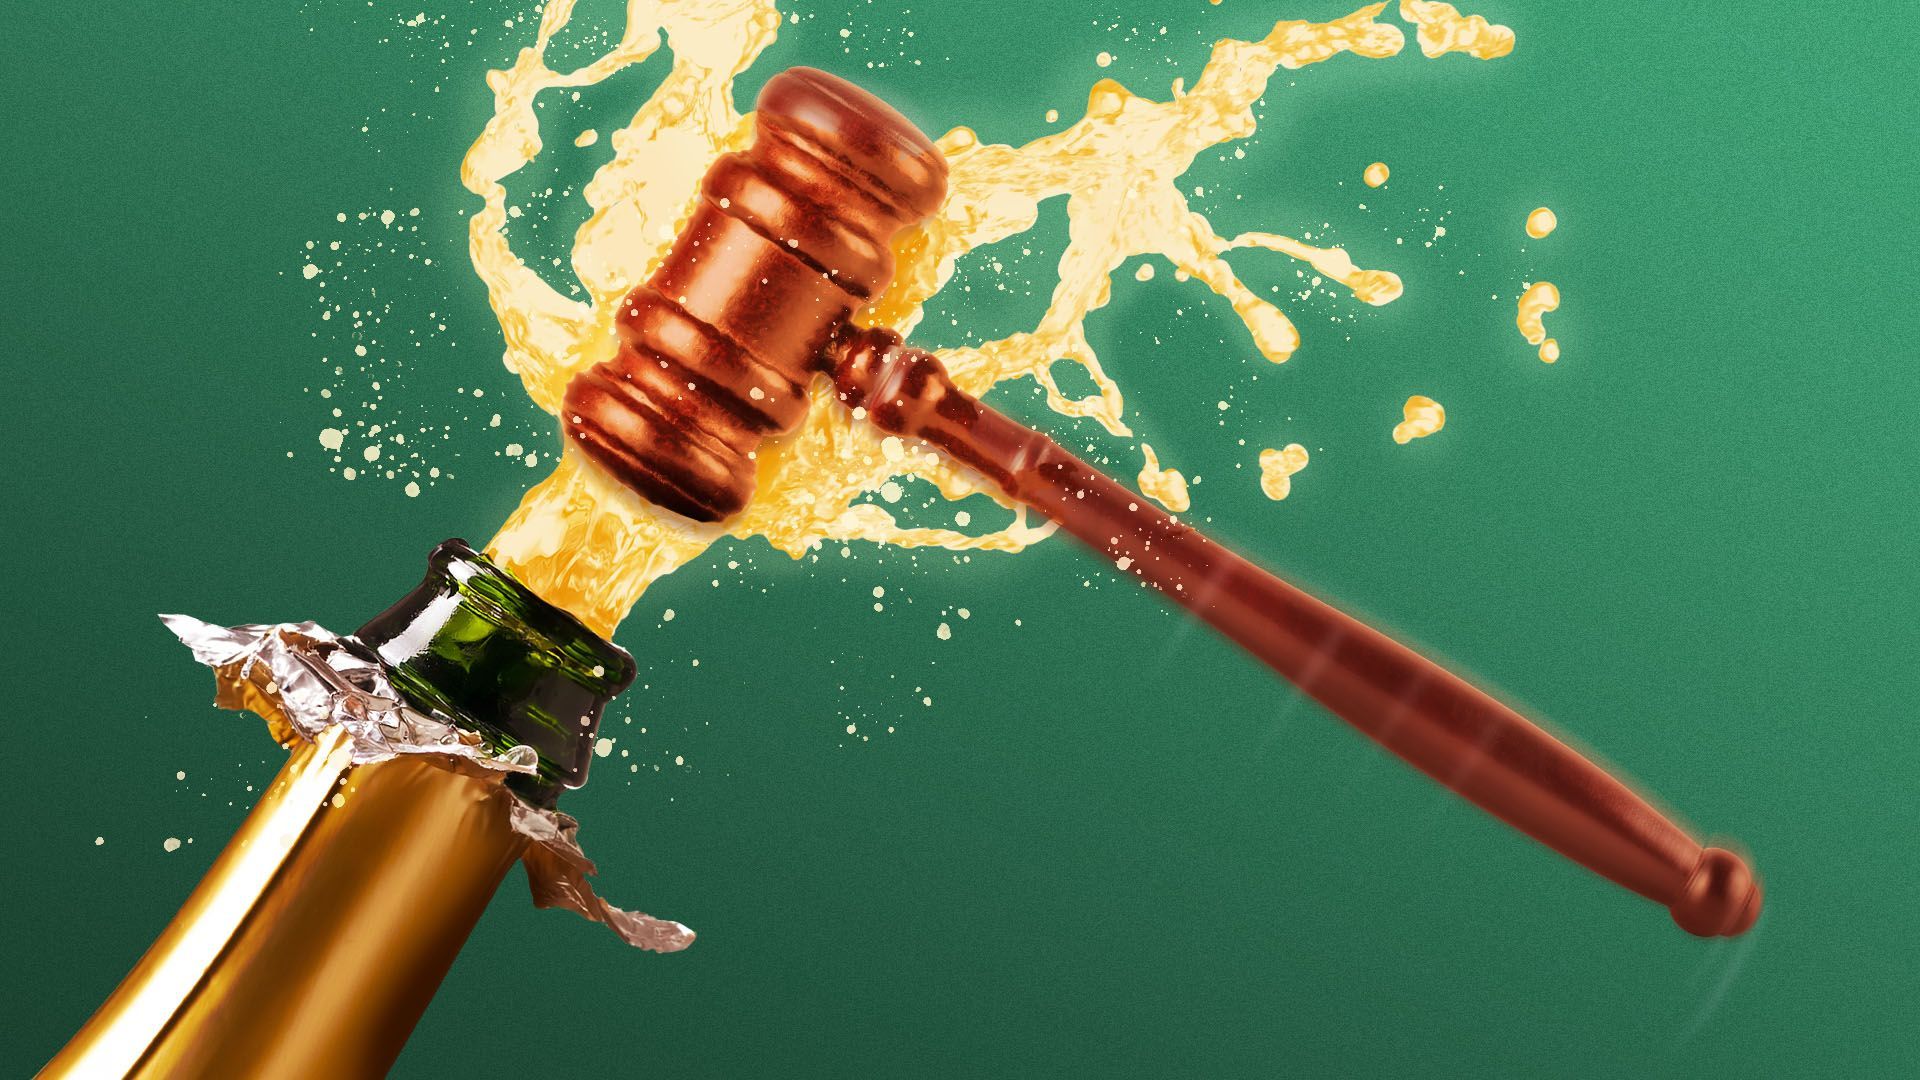 Illustration of a gavel popping out of a bottle of champagne like a cork